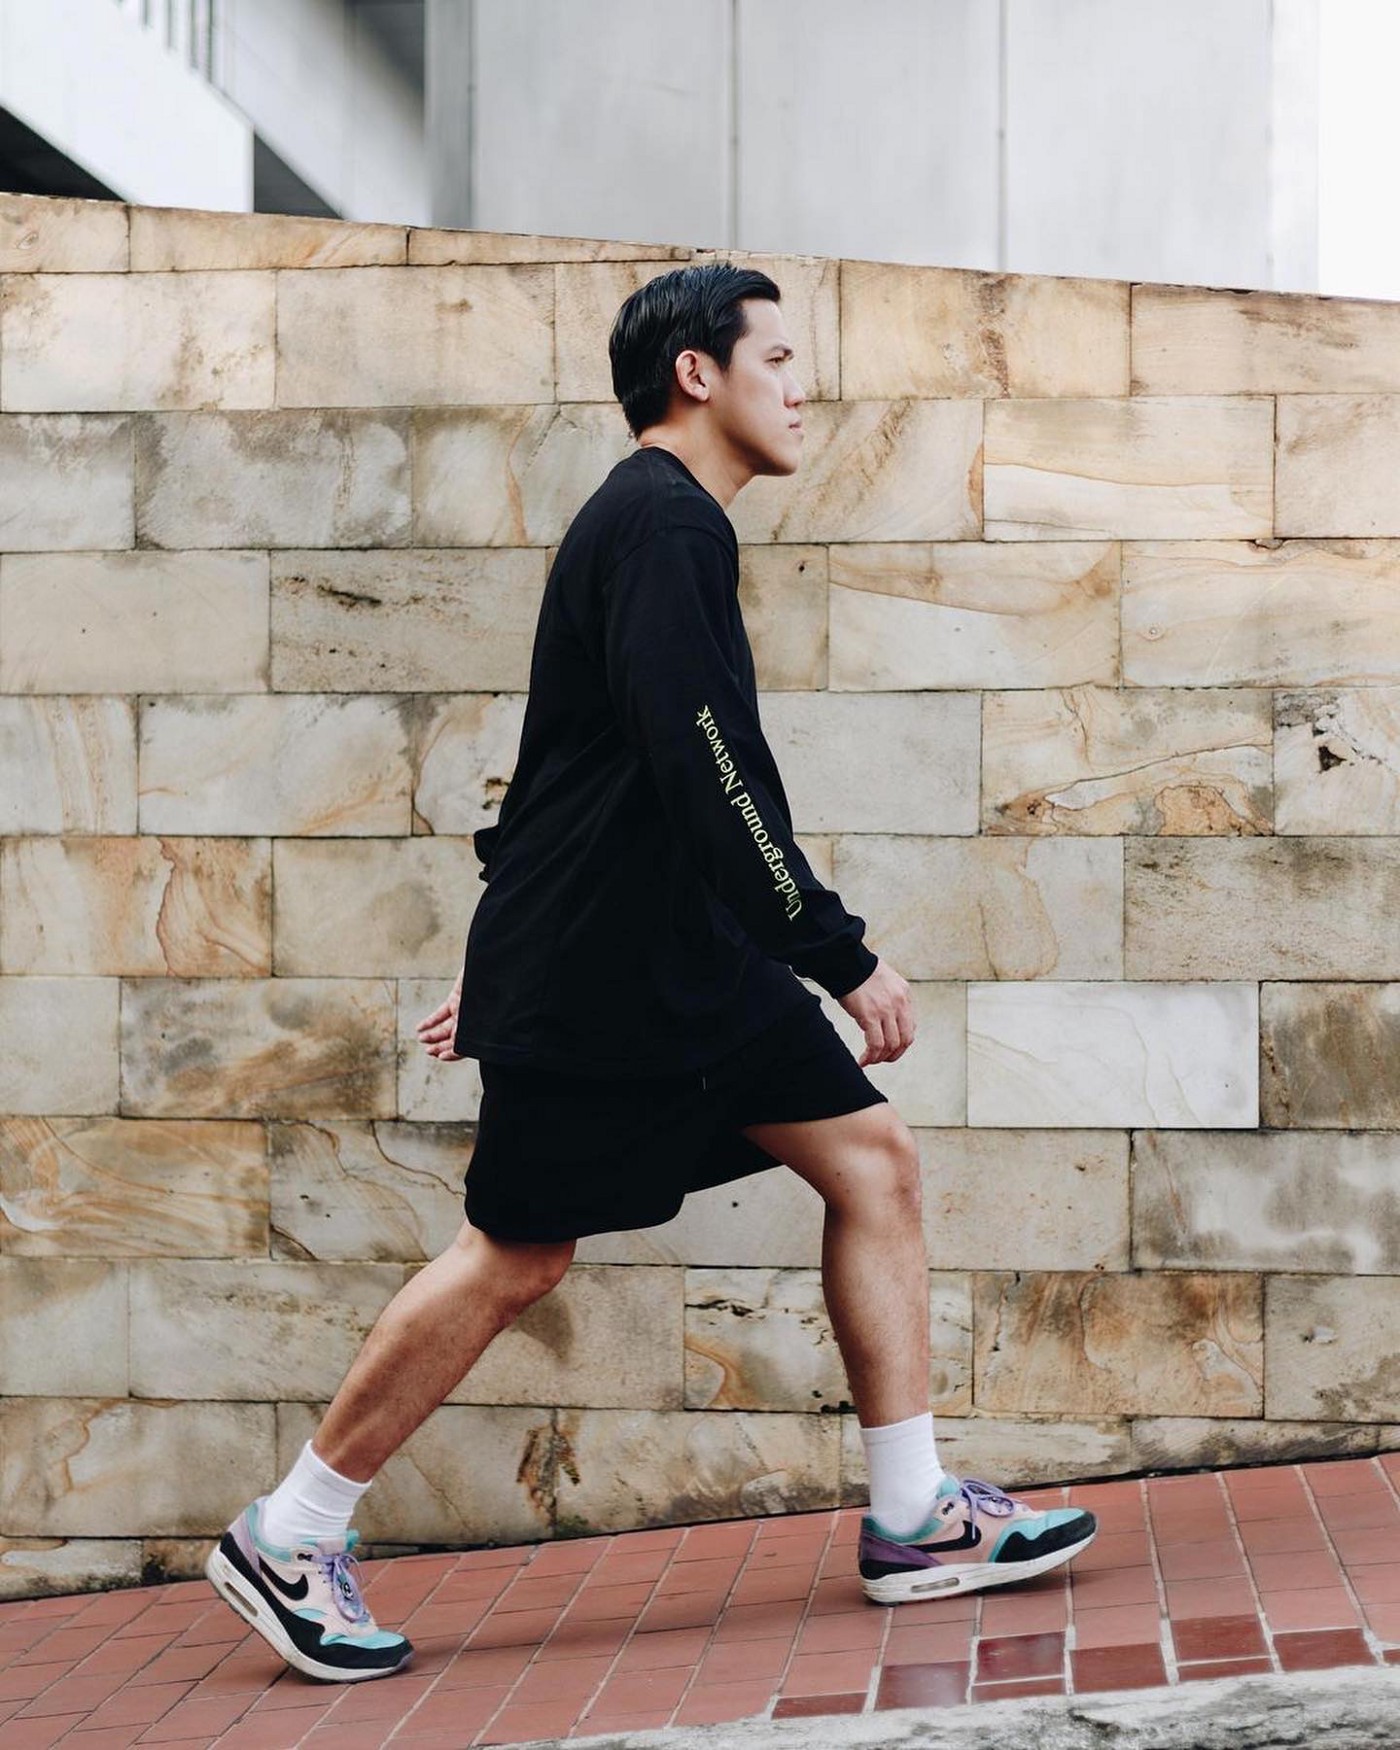 A man who wears sports fashion style clothing and shoes walk on the street.